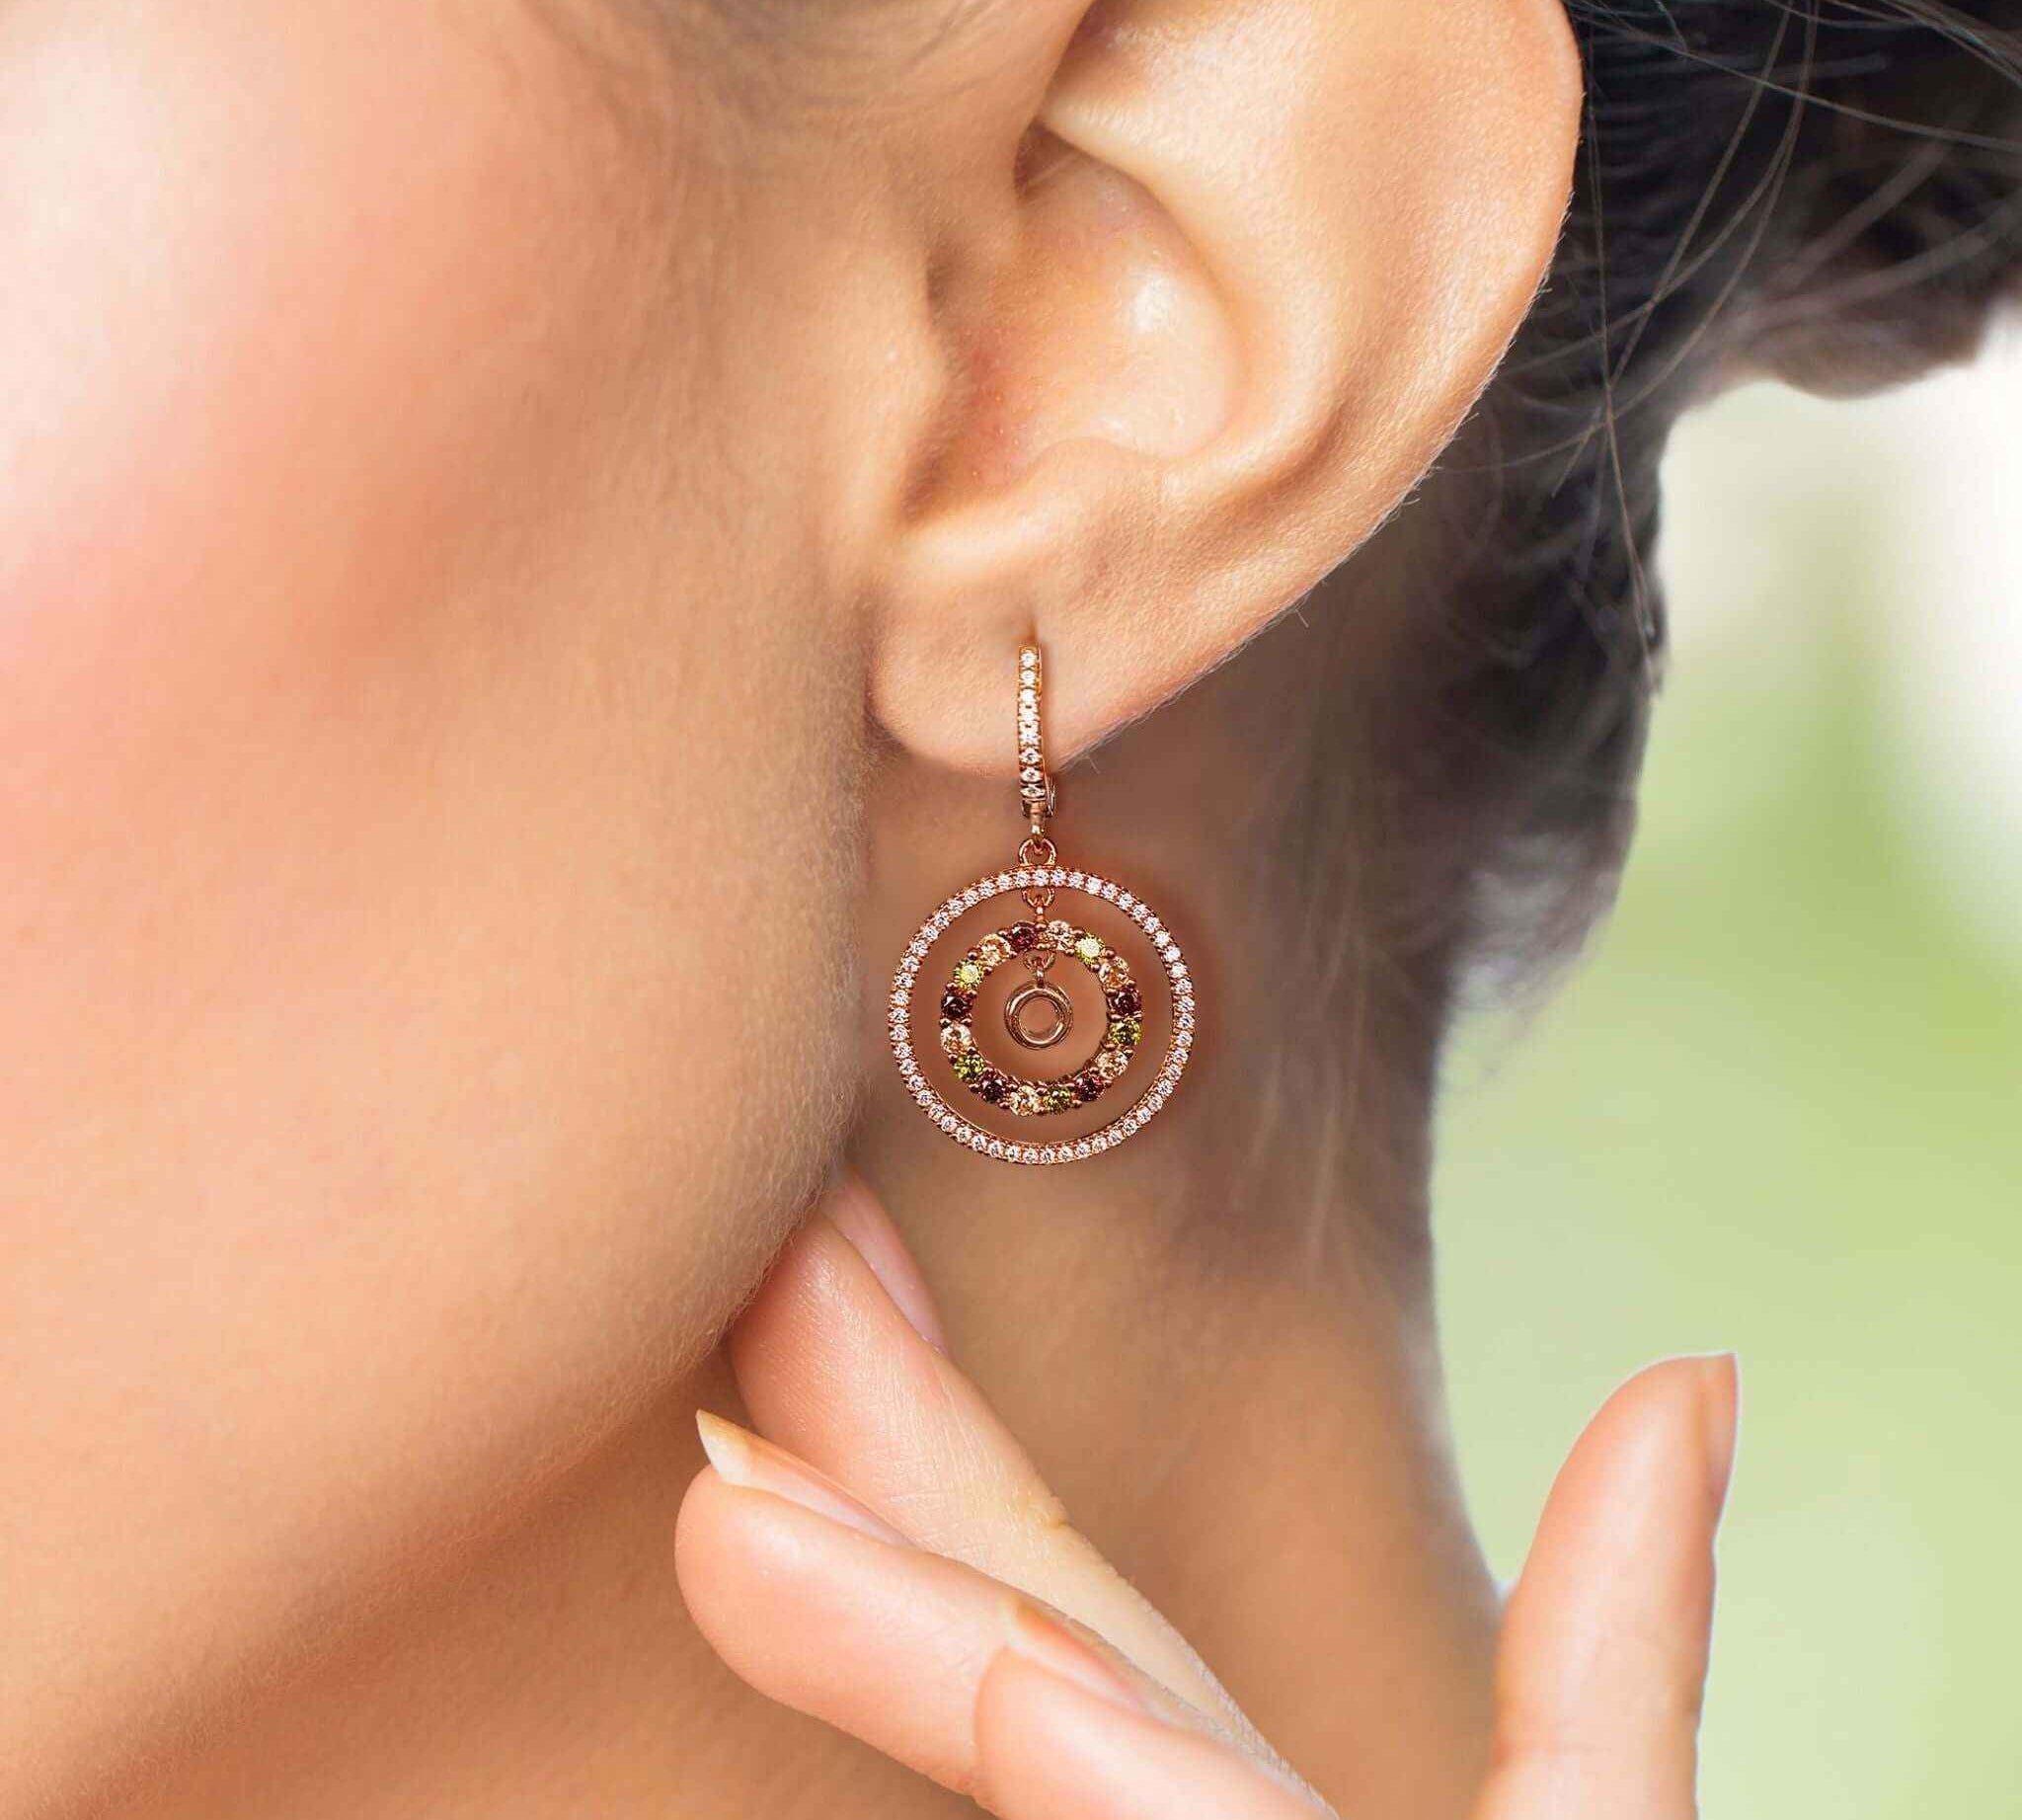 Close-up view of Halo Drop Earrings showcasing the intricate cubic zirconia detailing and rose gold finish.